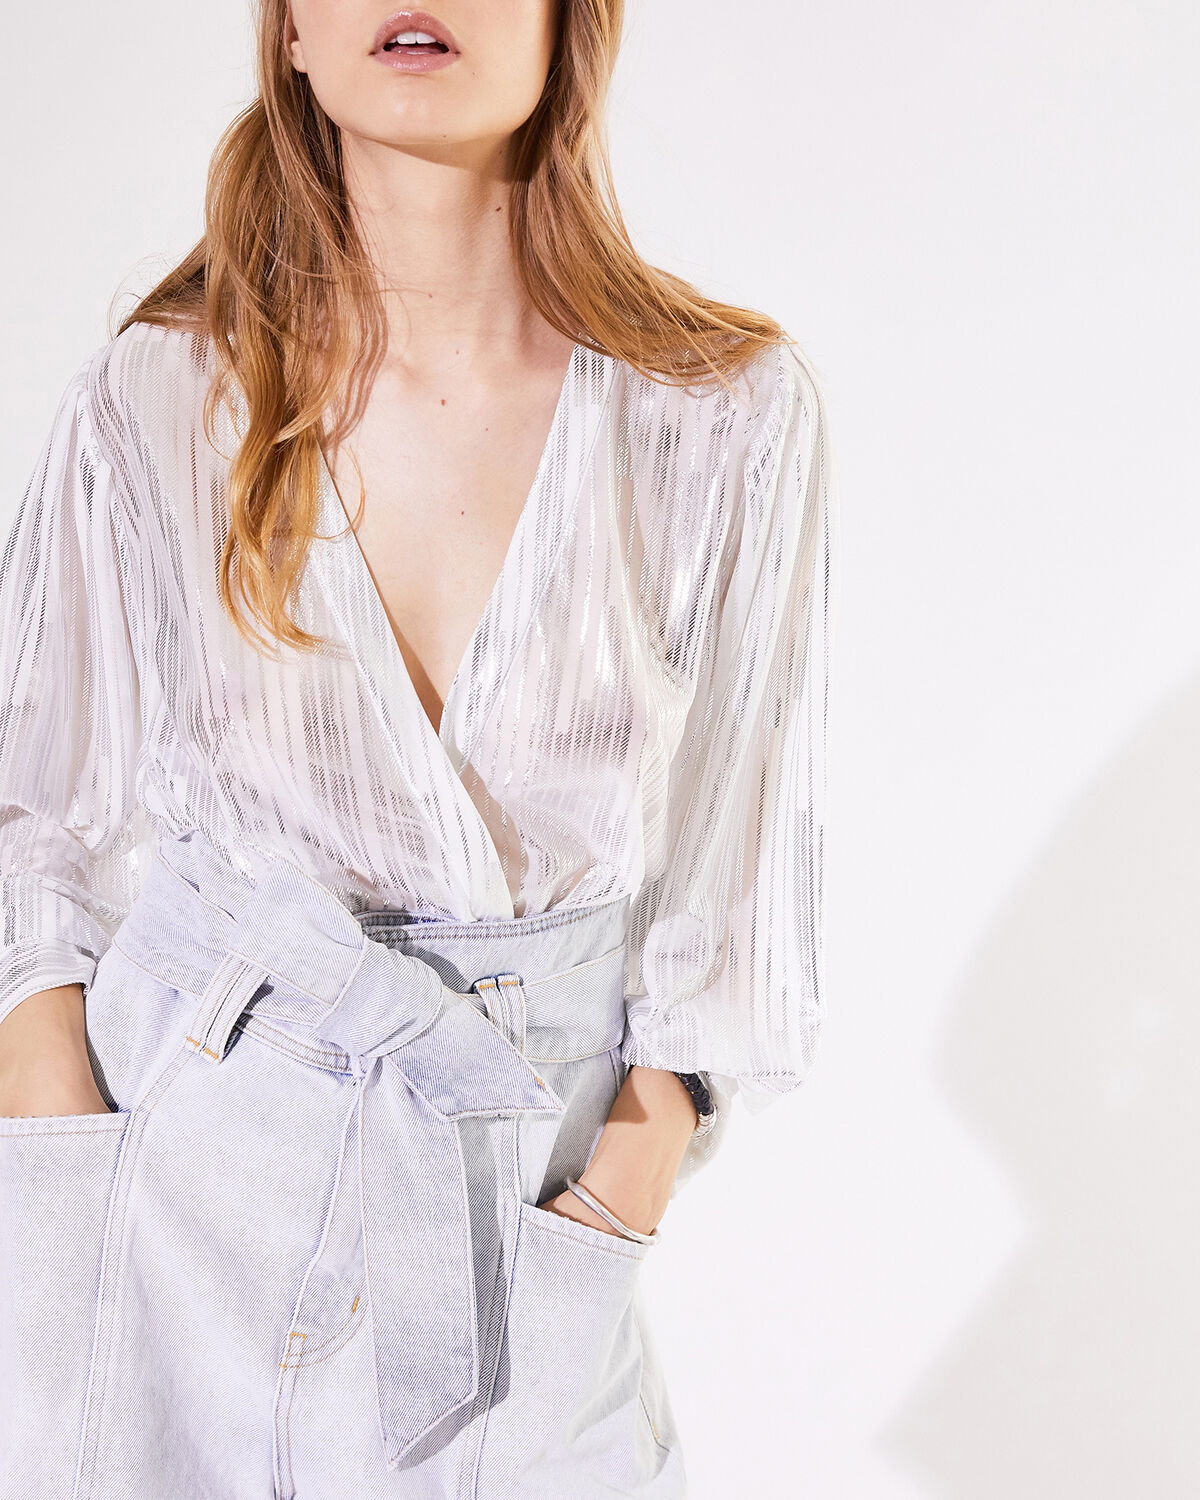 Photo of IRO Paris Darla Top Ecru And Silver - Lightweight And Fluid, This Transparent Top Features Fine Silver Lurex Stripes And A Wrapover Neckline. With Its Tightenable Waist, This Aerial Piece Can Be Worn On All Occasions. Fall Winter 19